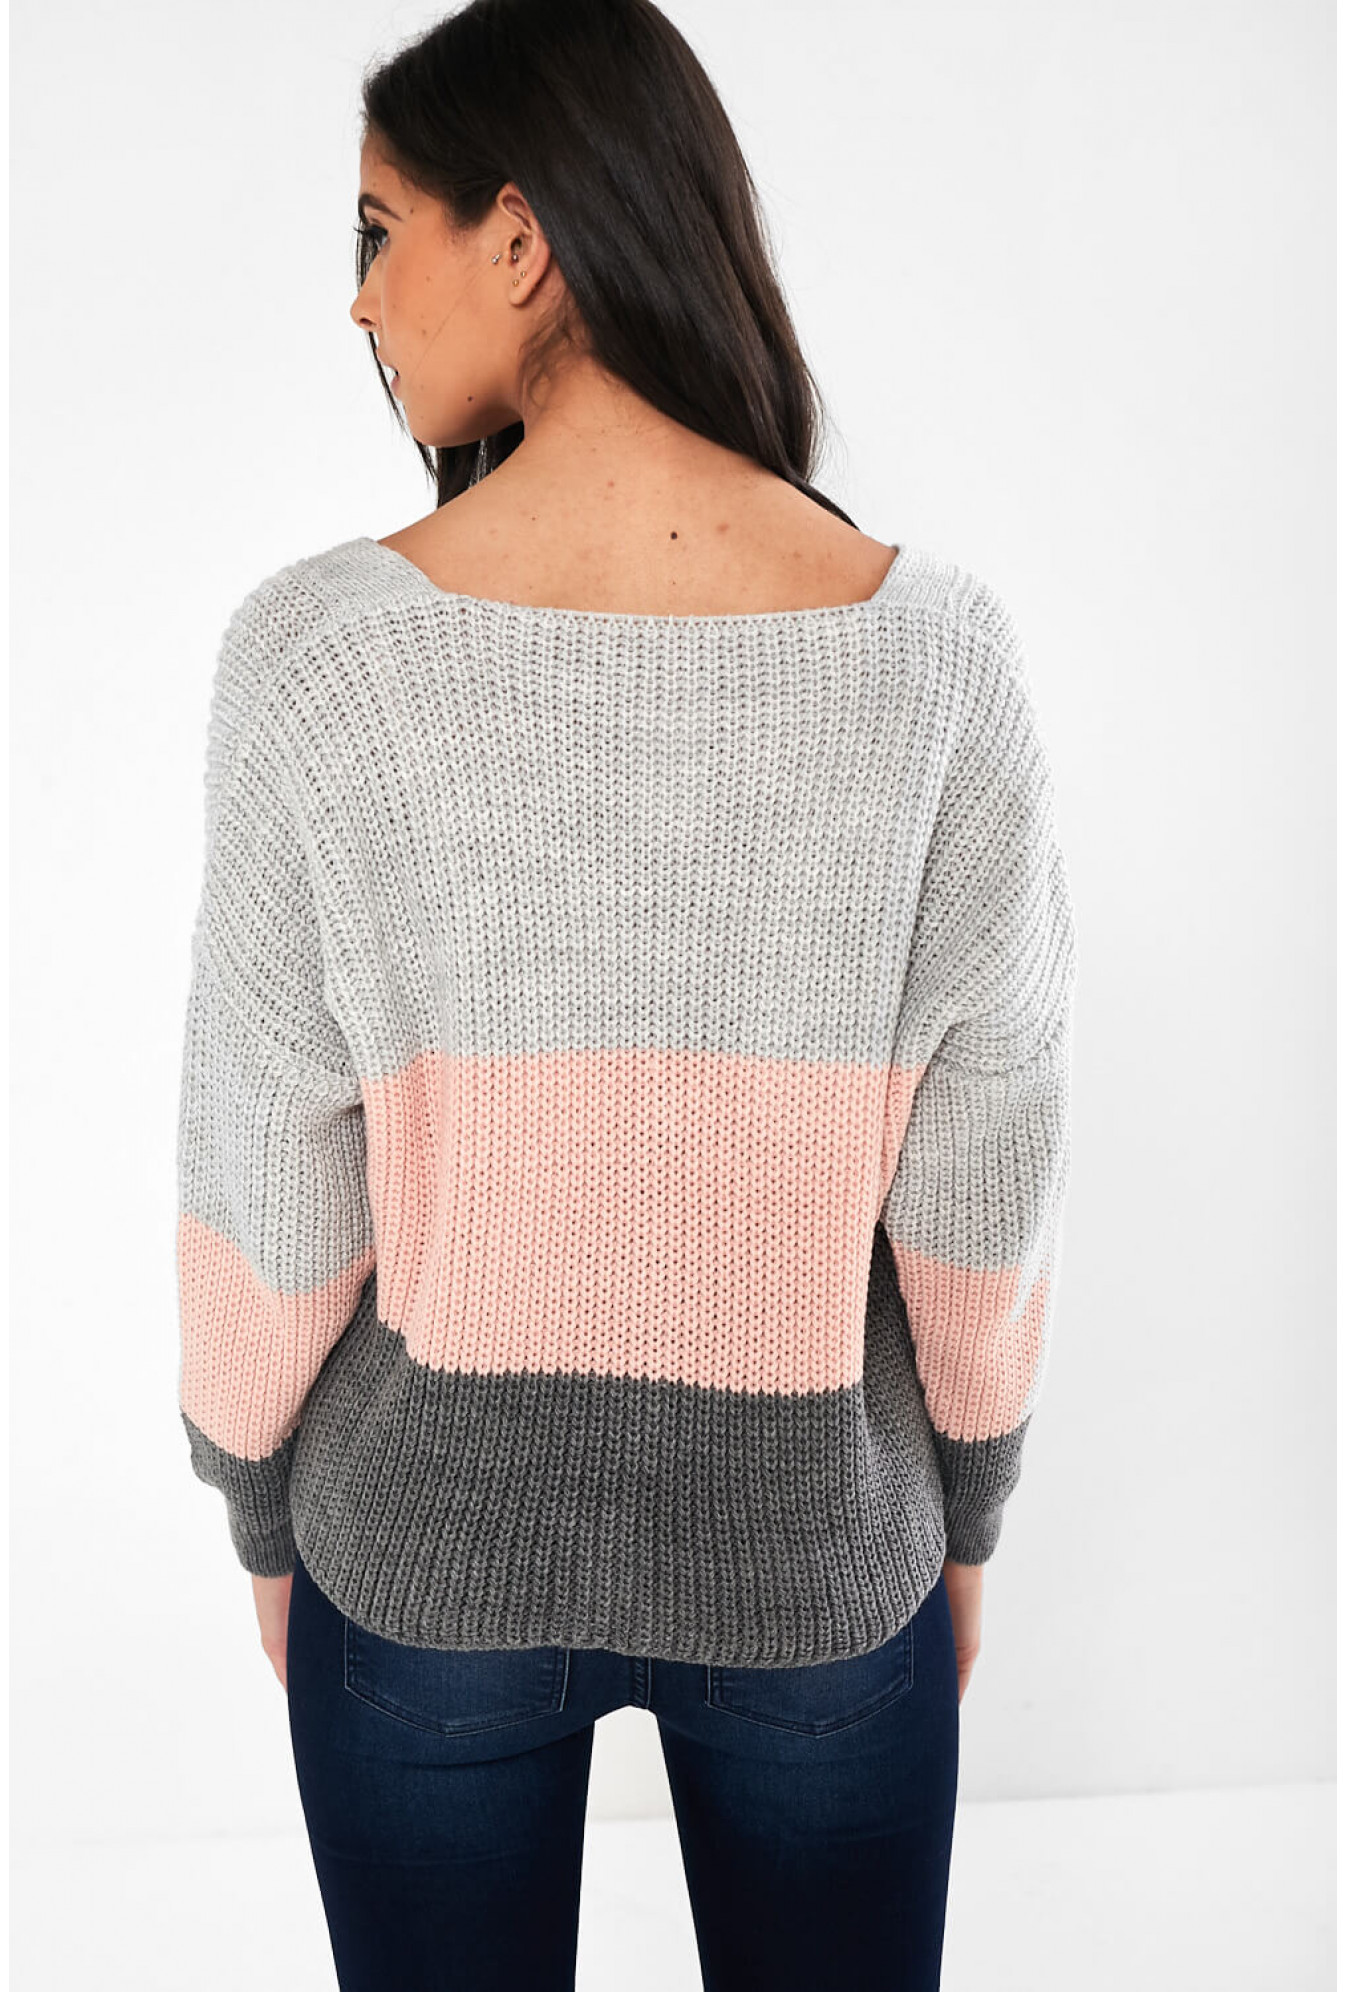 Colour Block Cardigan in Grey and Pink | iCLOTHING